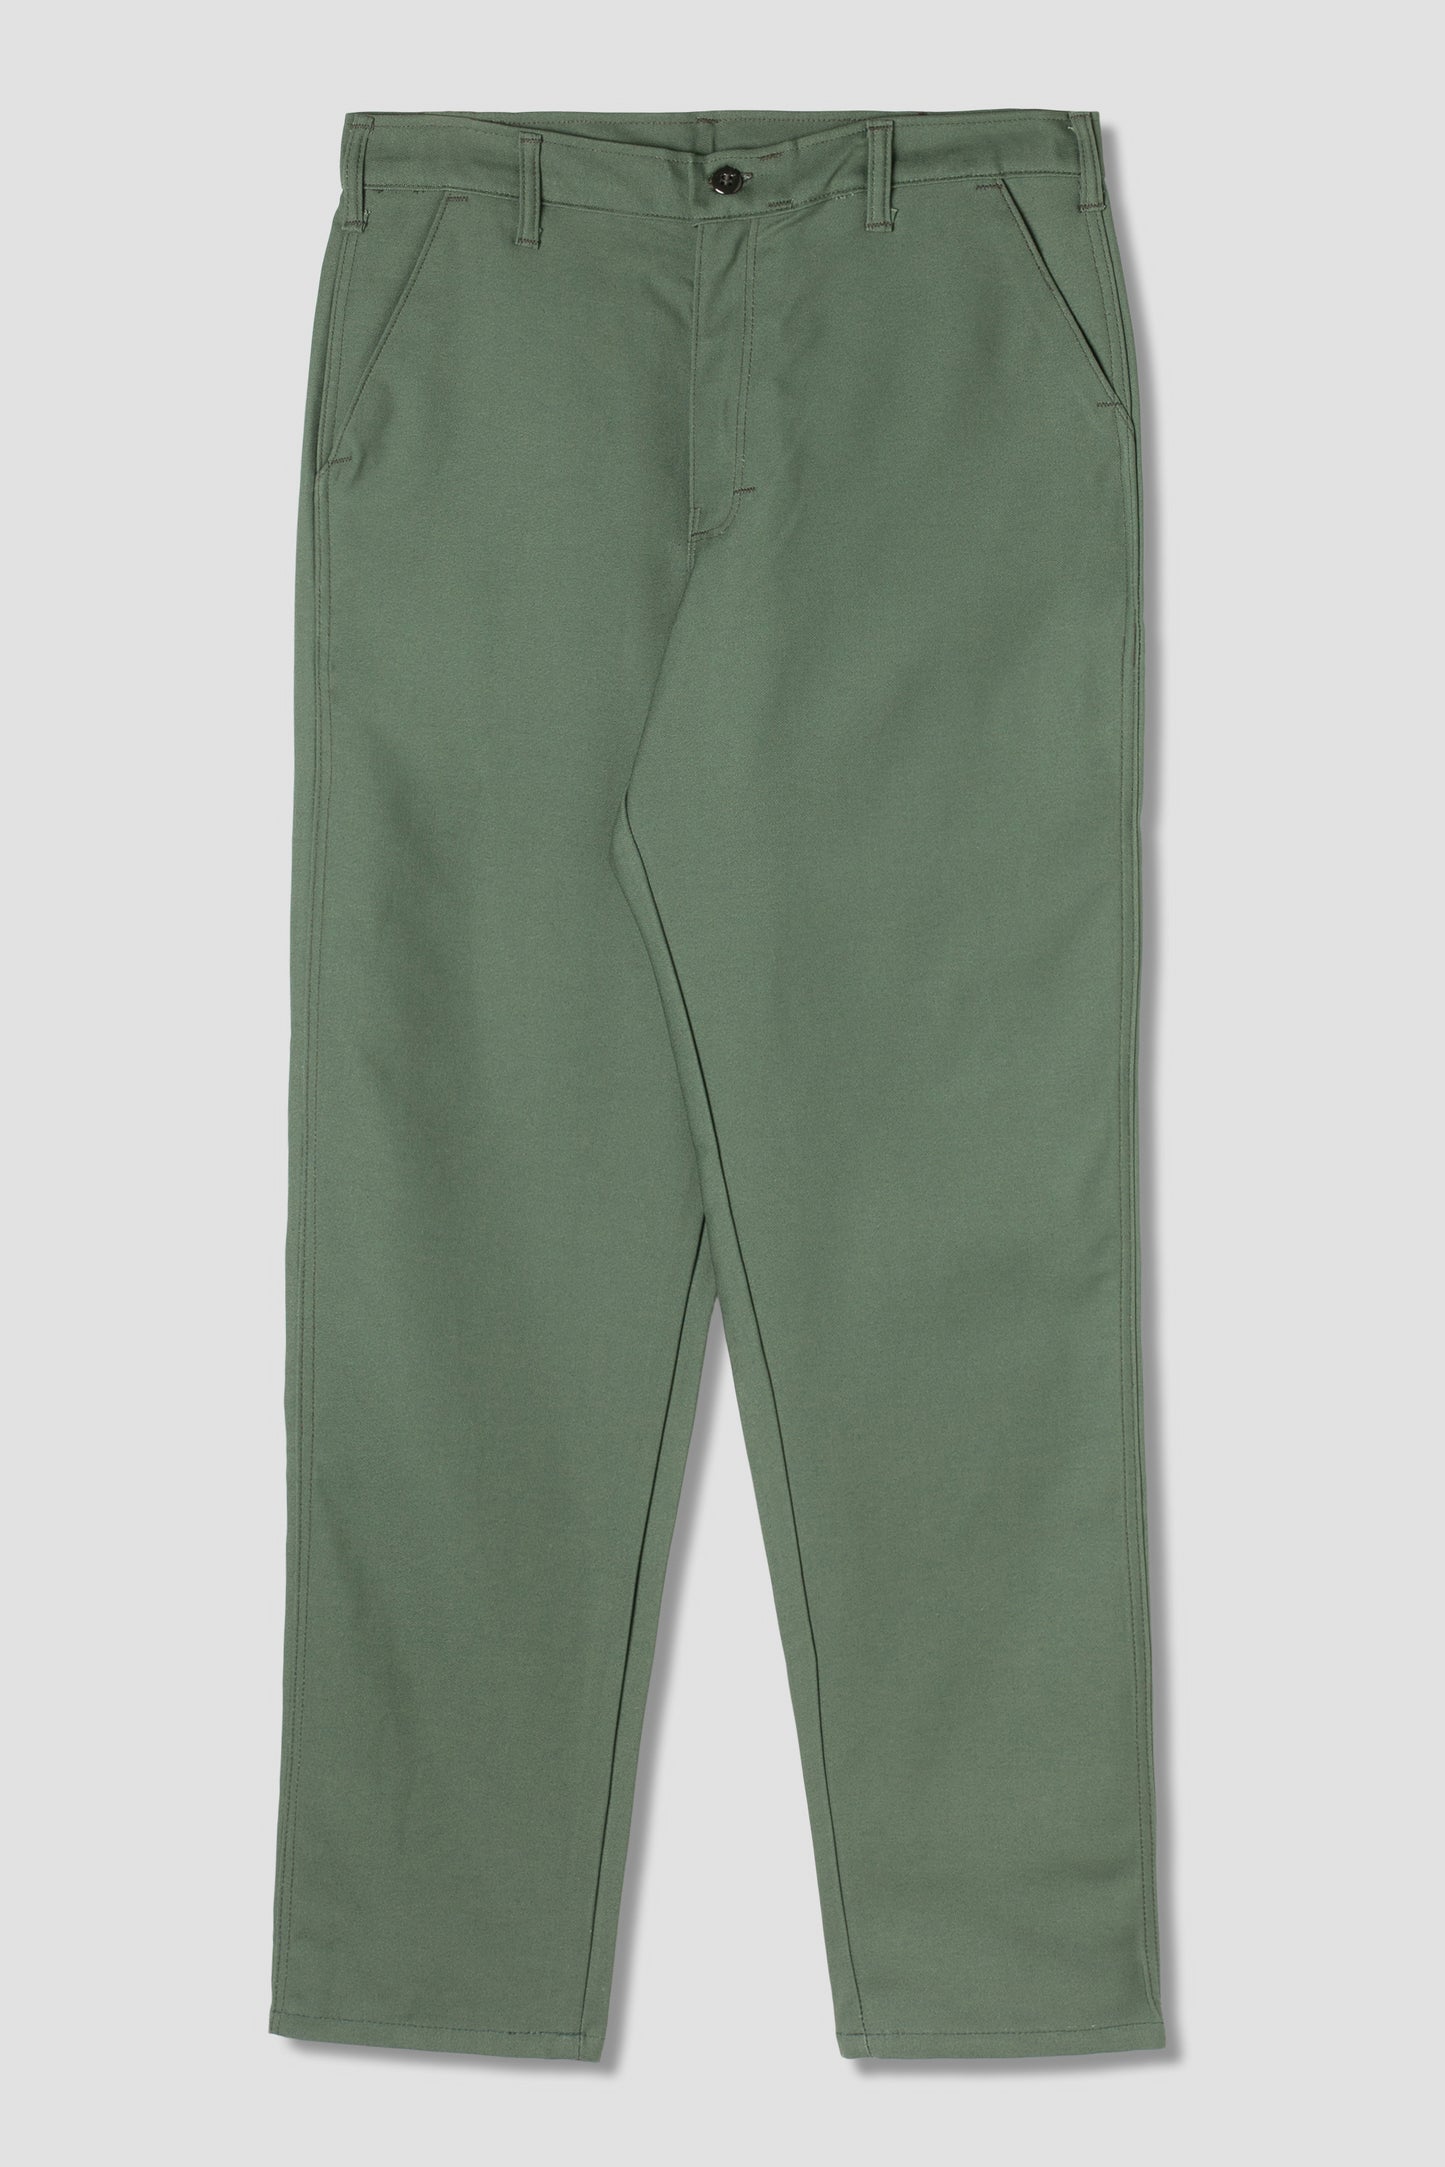 Easy Chino (Olive Sateen 8.5oz) - Stan Ray